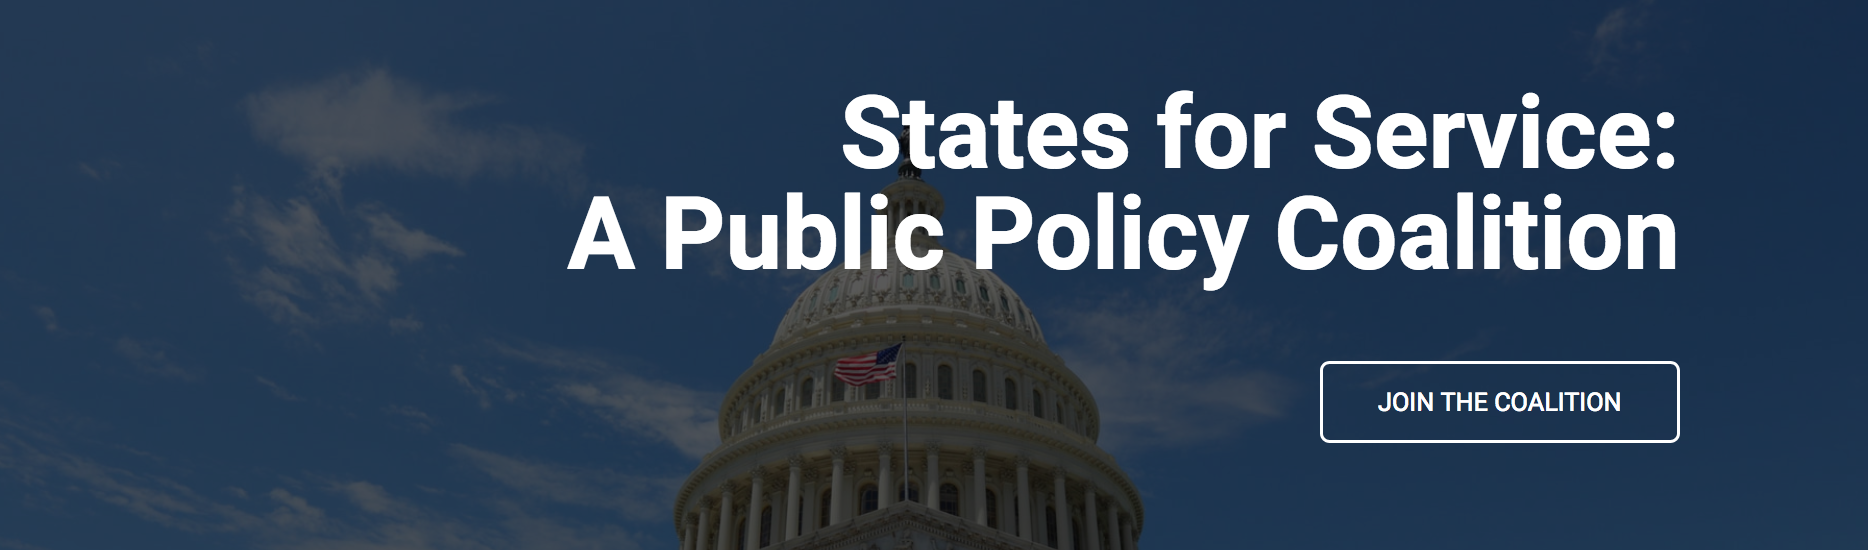 States for Service: A Public Policy Coalition header image